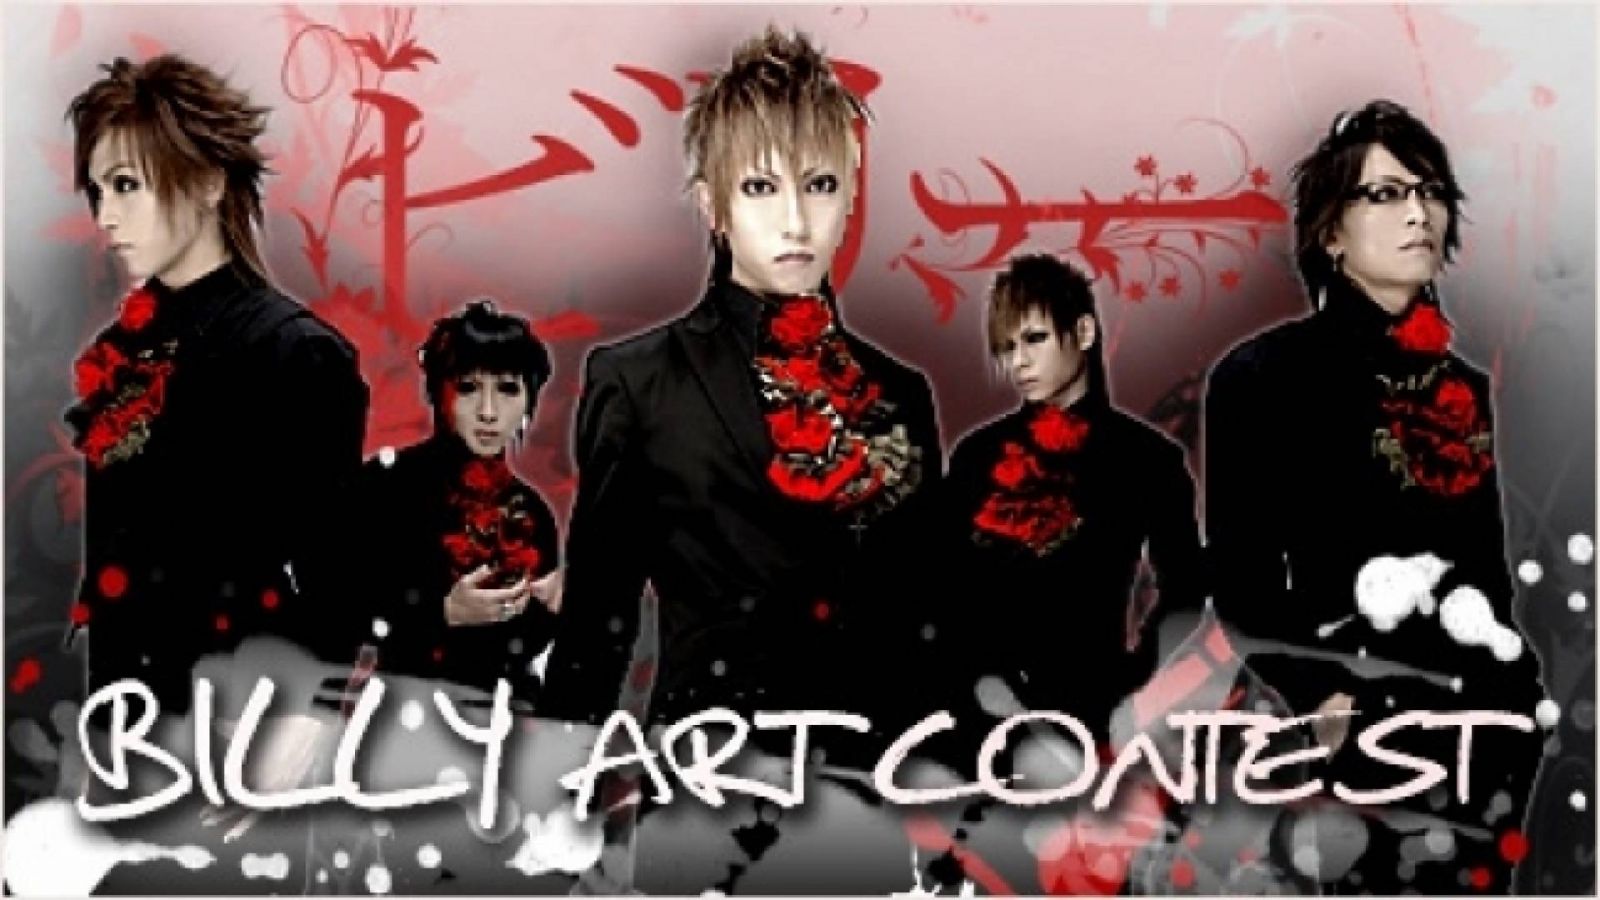 Billy Art Contest results © J-ROCK & JaME